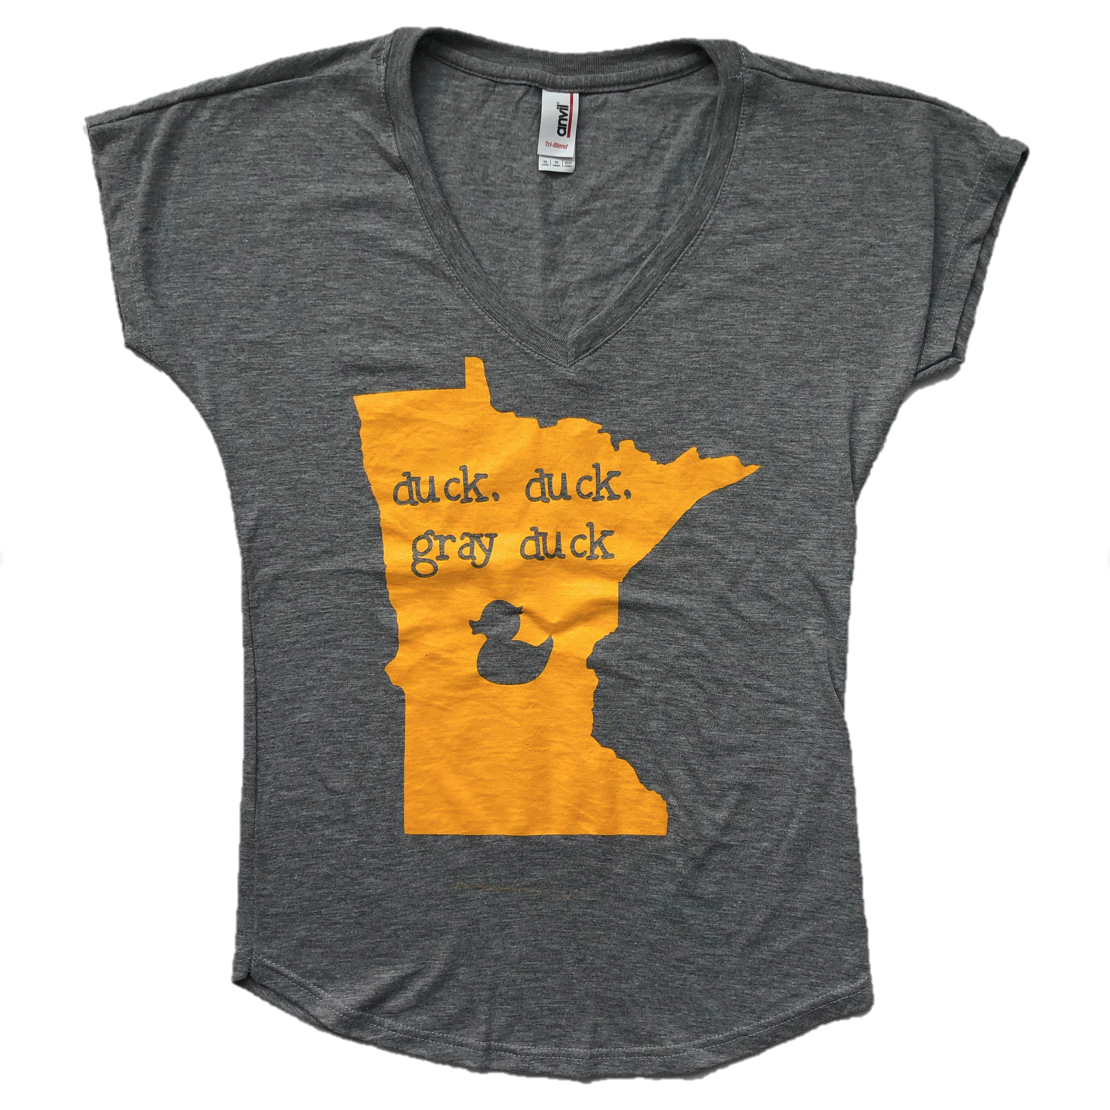 Duck duck gray duck v-neck t-shirt MN tee with Free Shipping